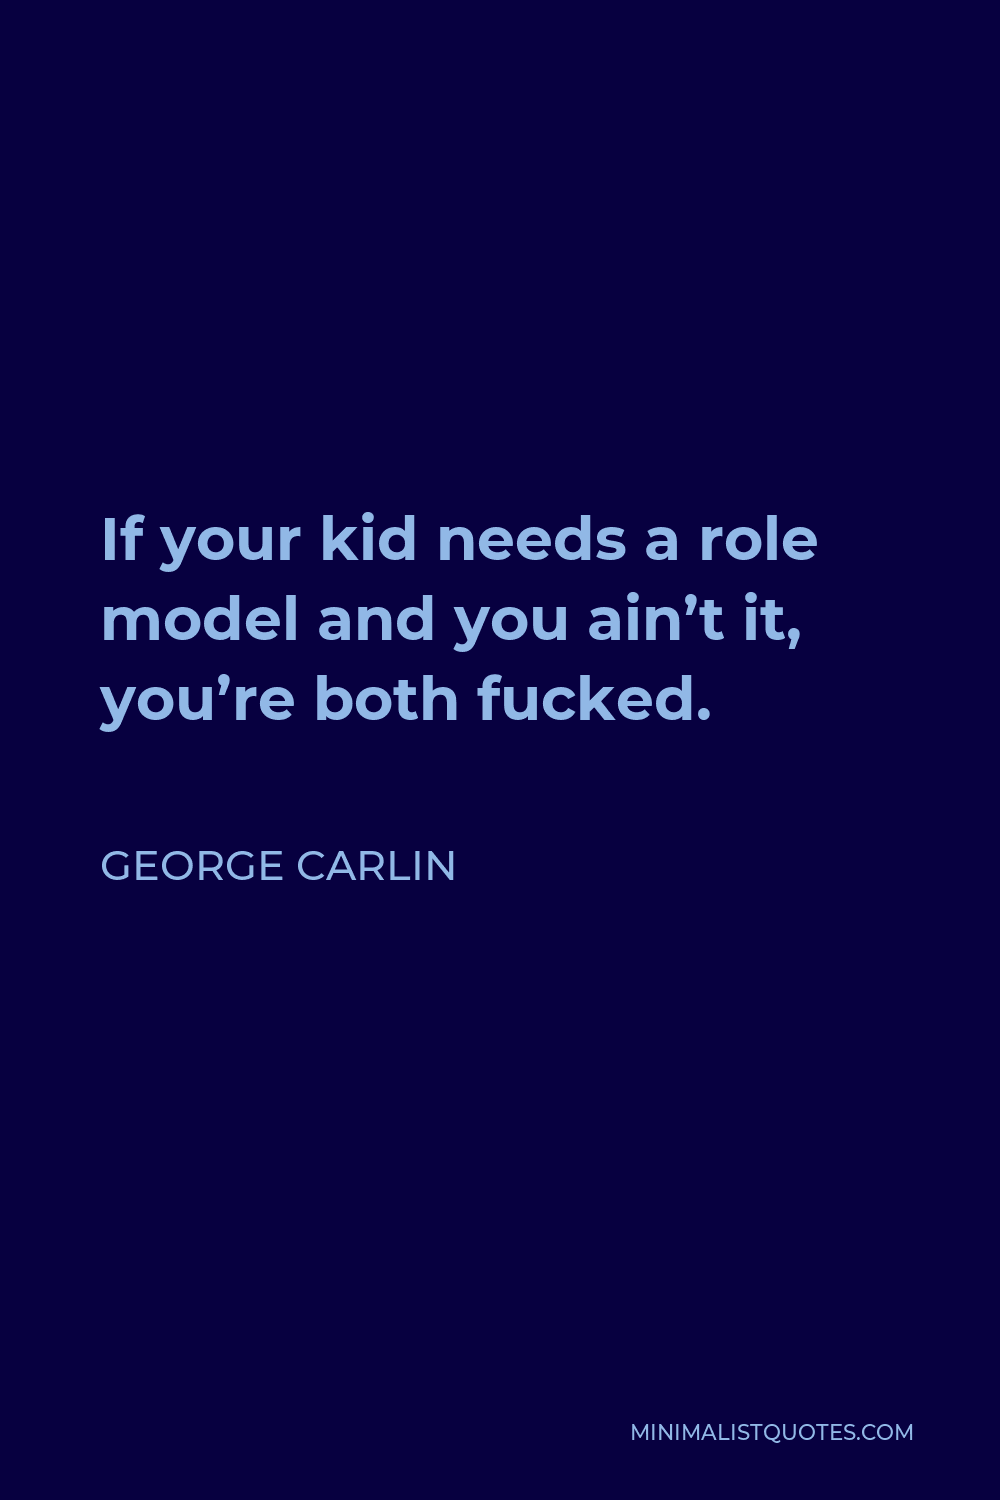 George Carlin Quote - If your kid needs a role model and you ain’t it, you’re both fucked.